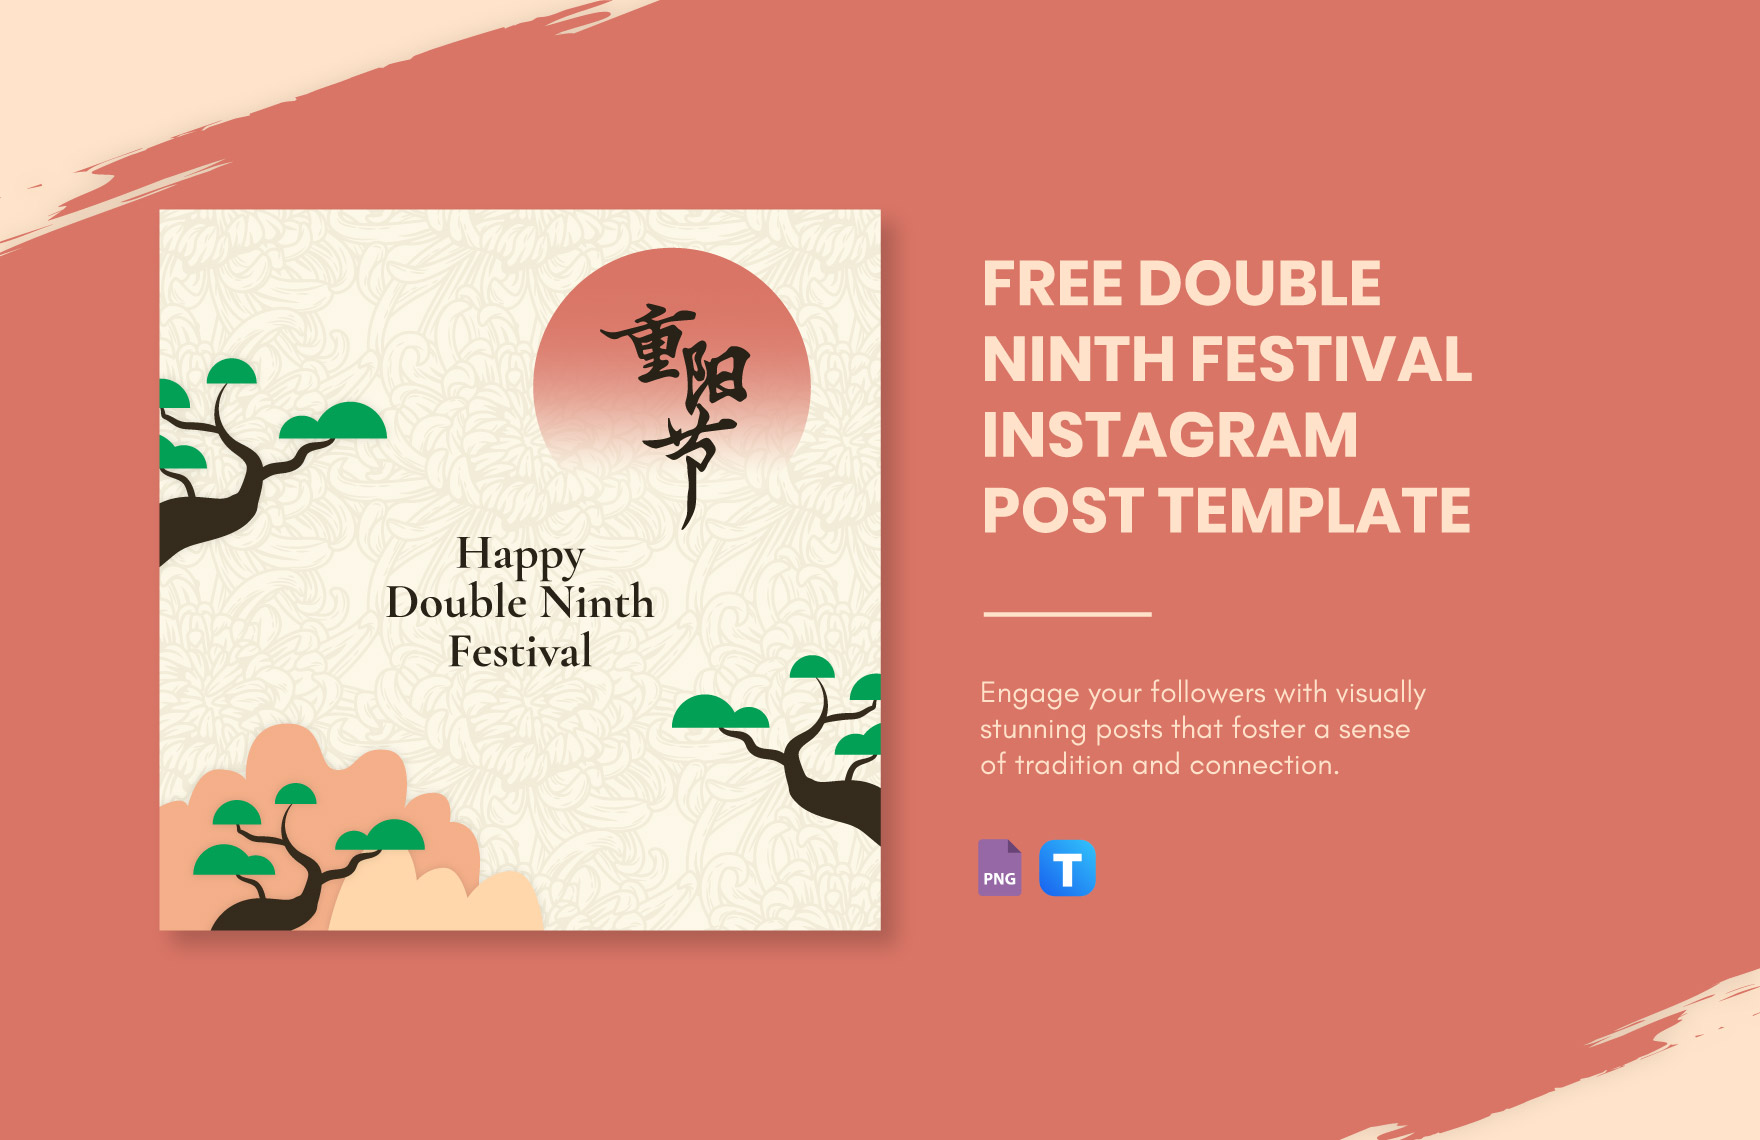 Free Double Ninth Festival Instagram Post Template in PNG